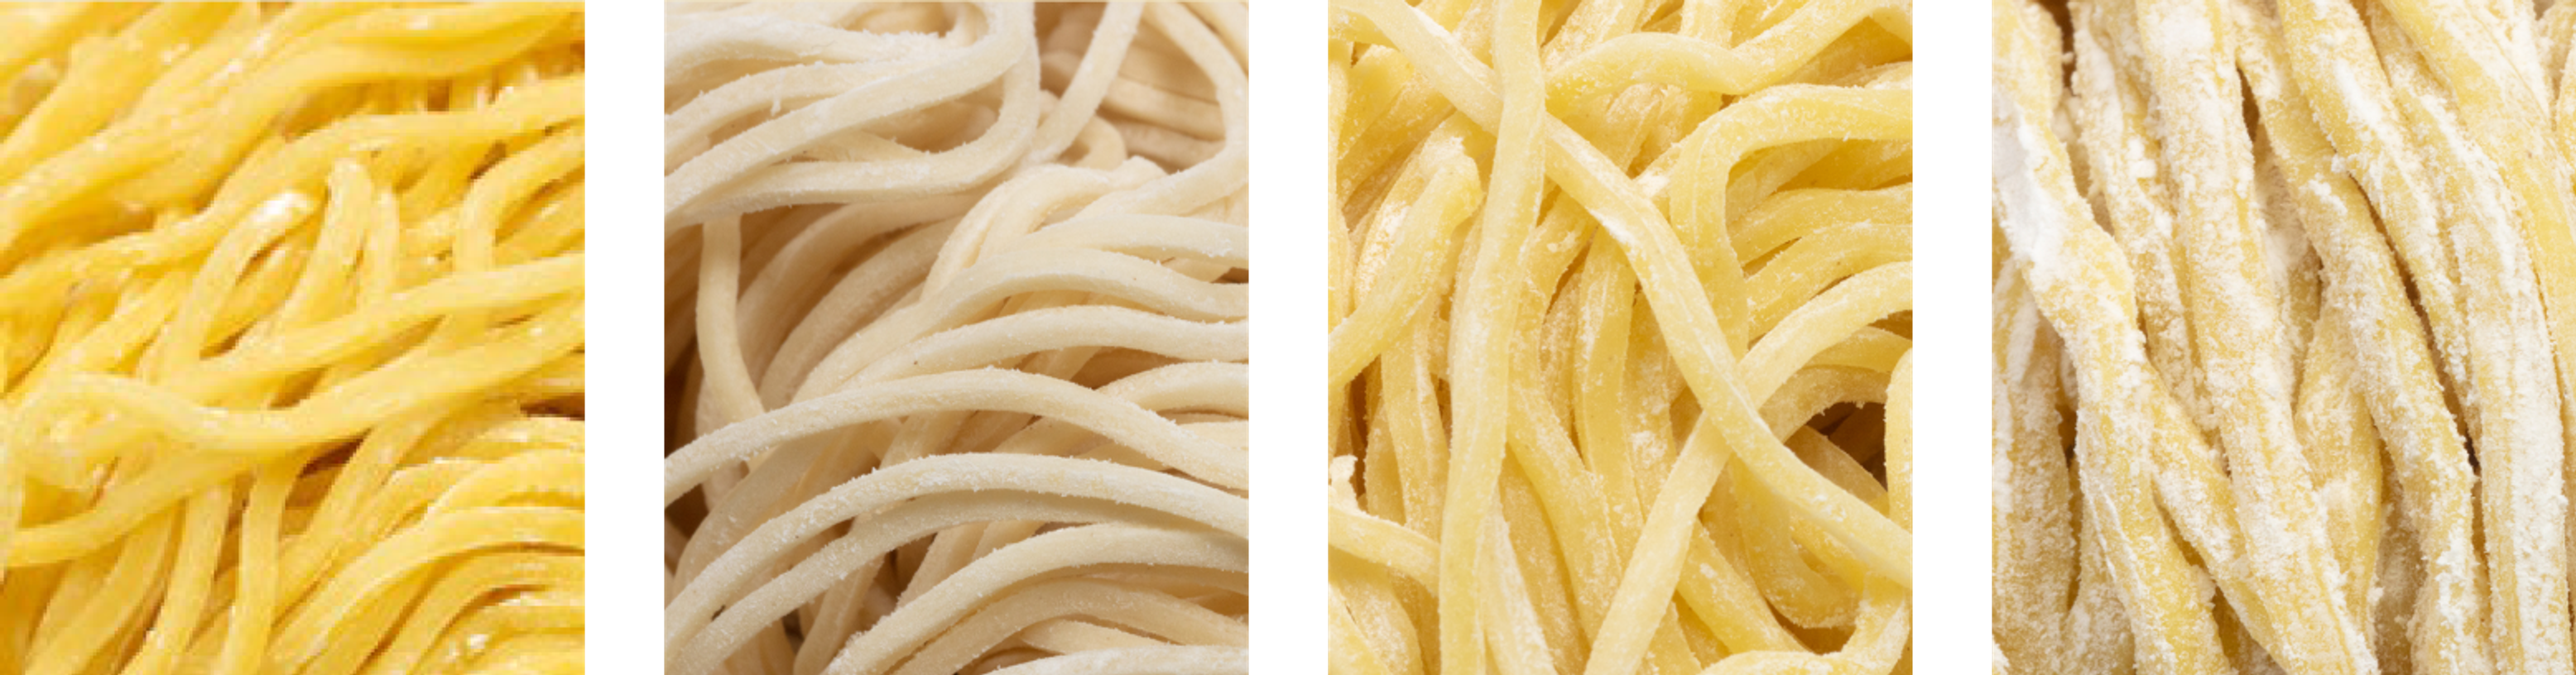 Images showing the different types of noodles